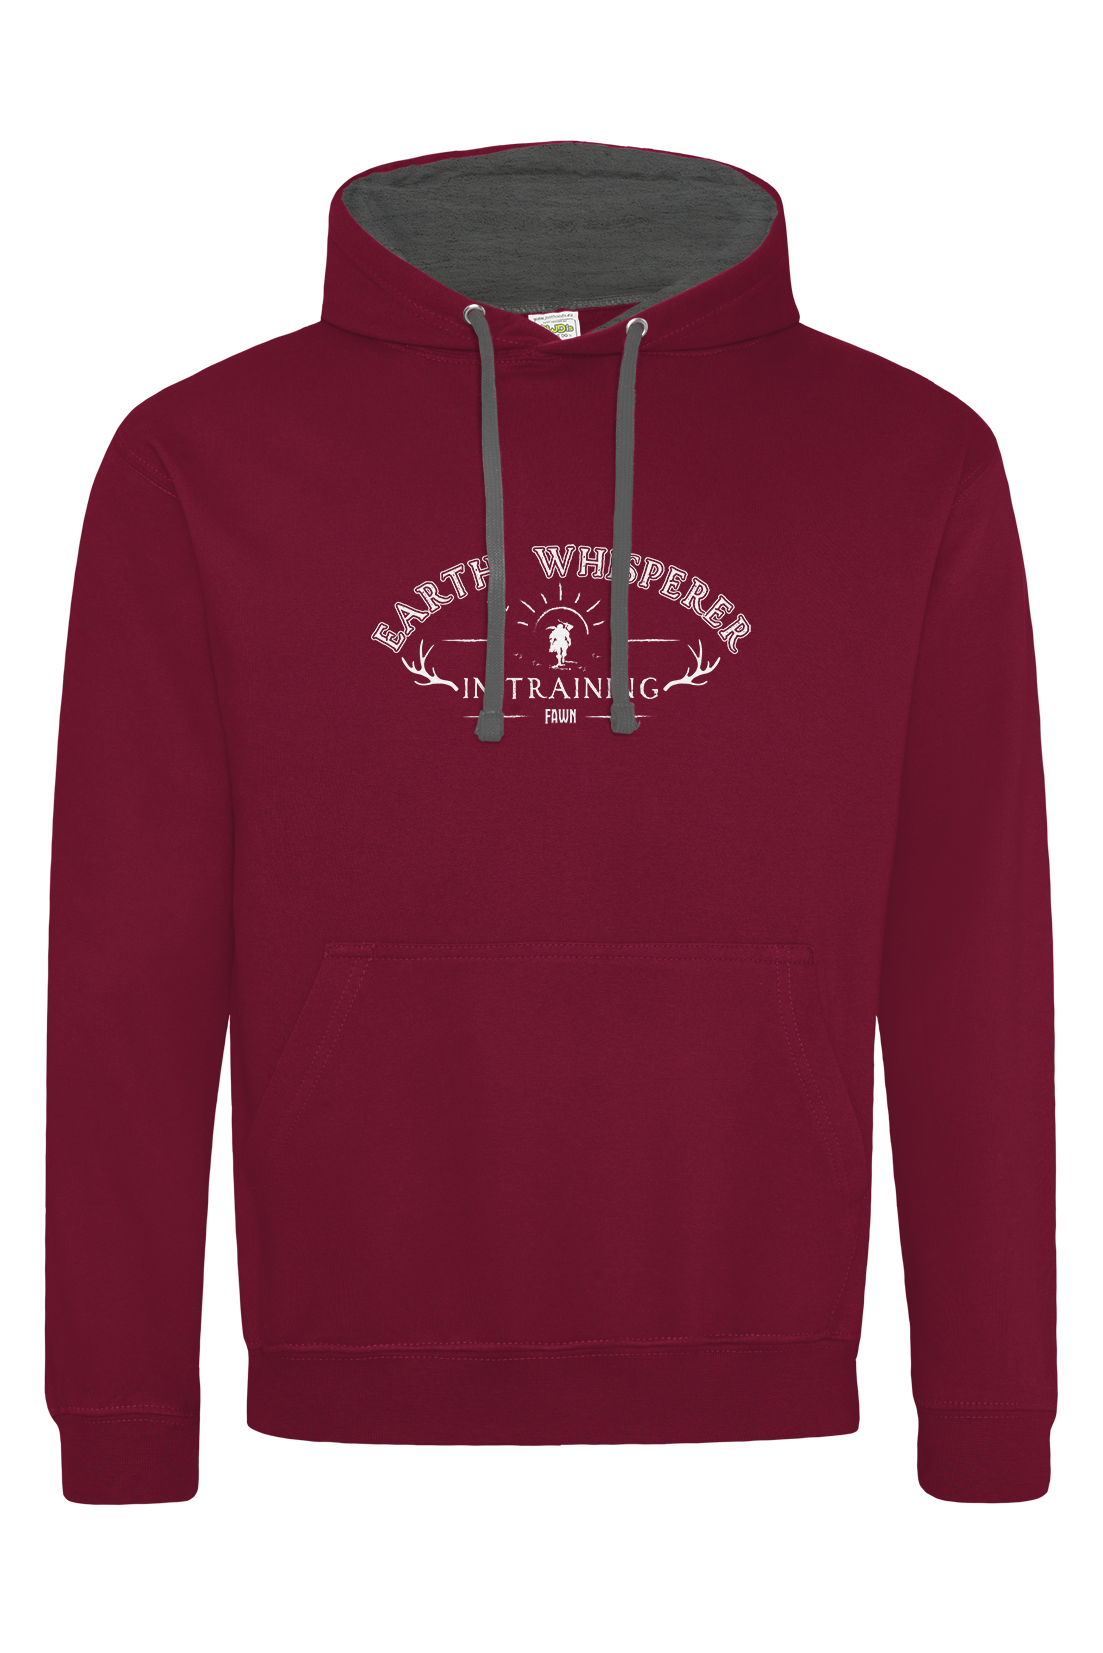 Fawn Earth Whisperer adult hoodie